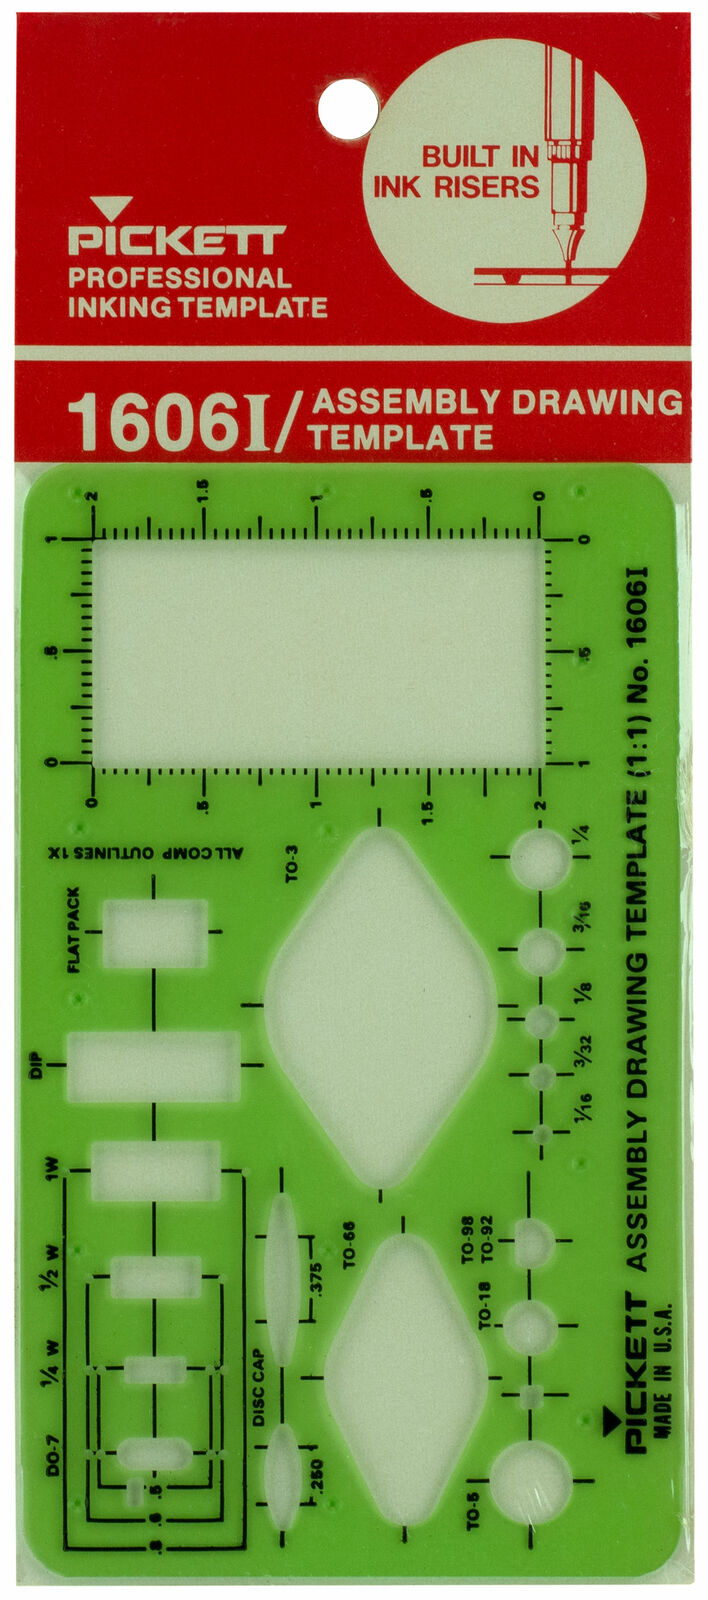 Pickett Professional Inking Template Assembly Drawing Template 1:1 Ratio